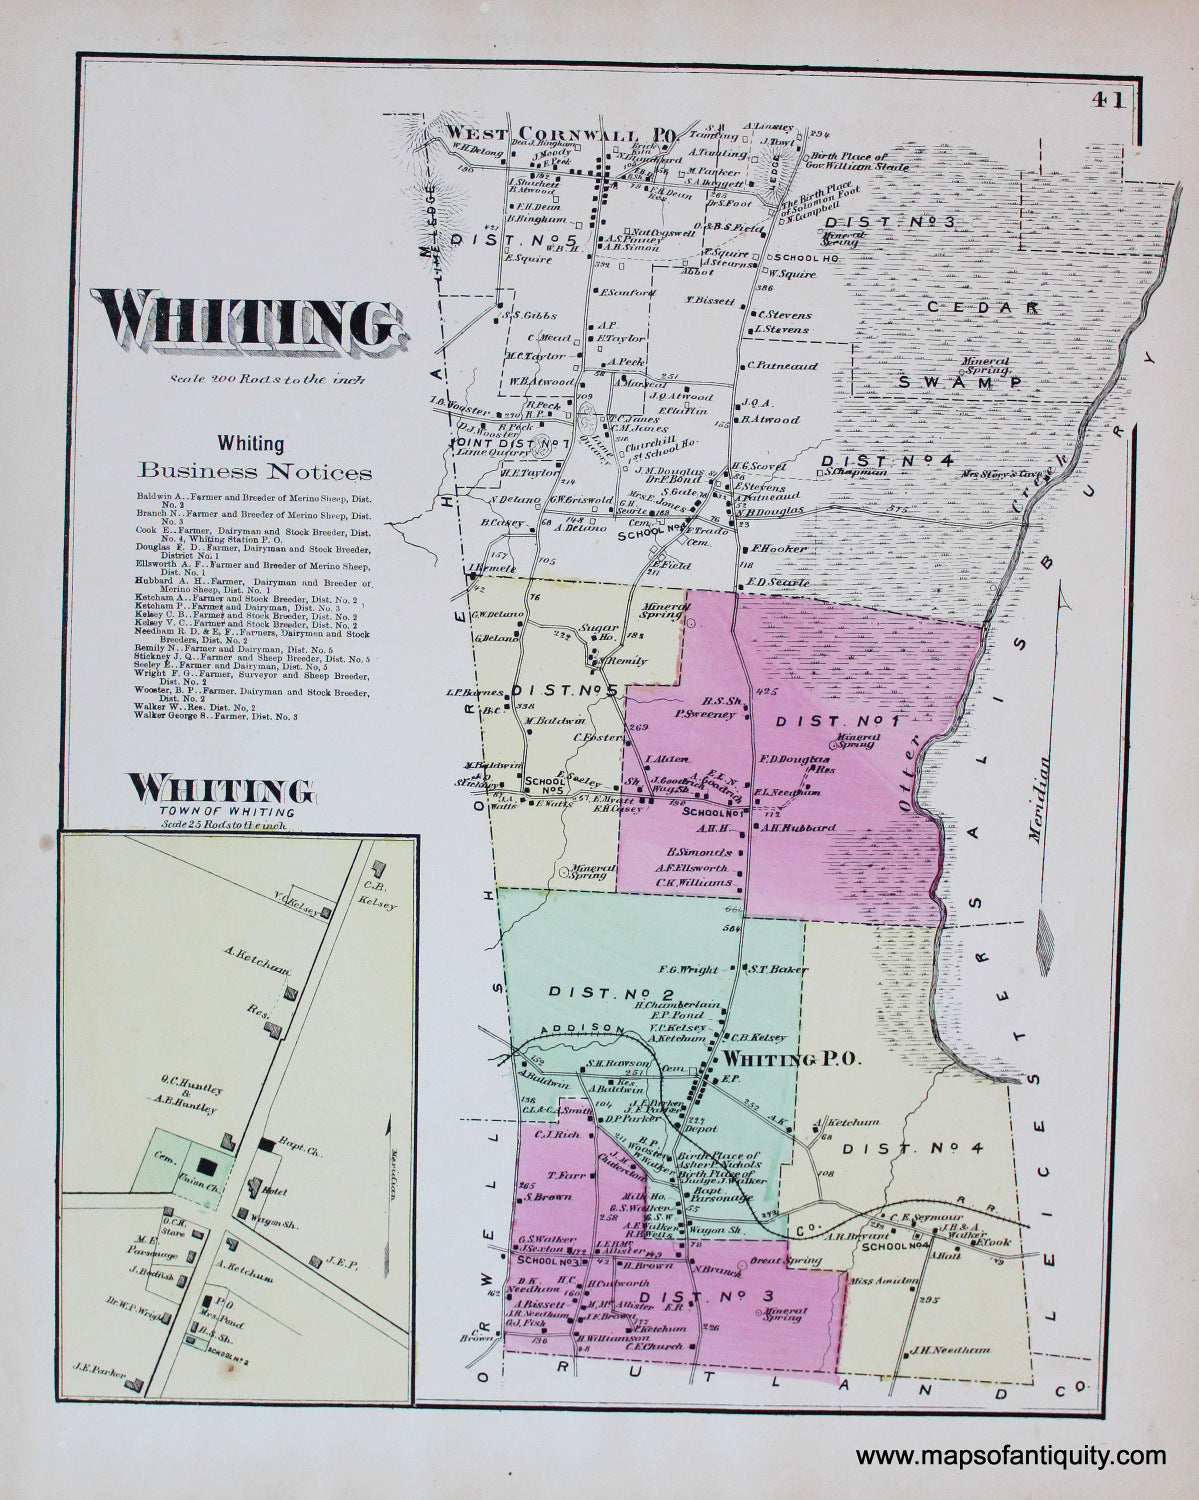 Antique-Hand-Colored-Map-Whiting-Whiting-Town-of-VT---Vermont-United-States-Northeast-1871-Beers-Maps-Of-Antiquity